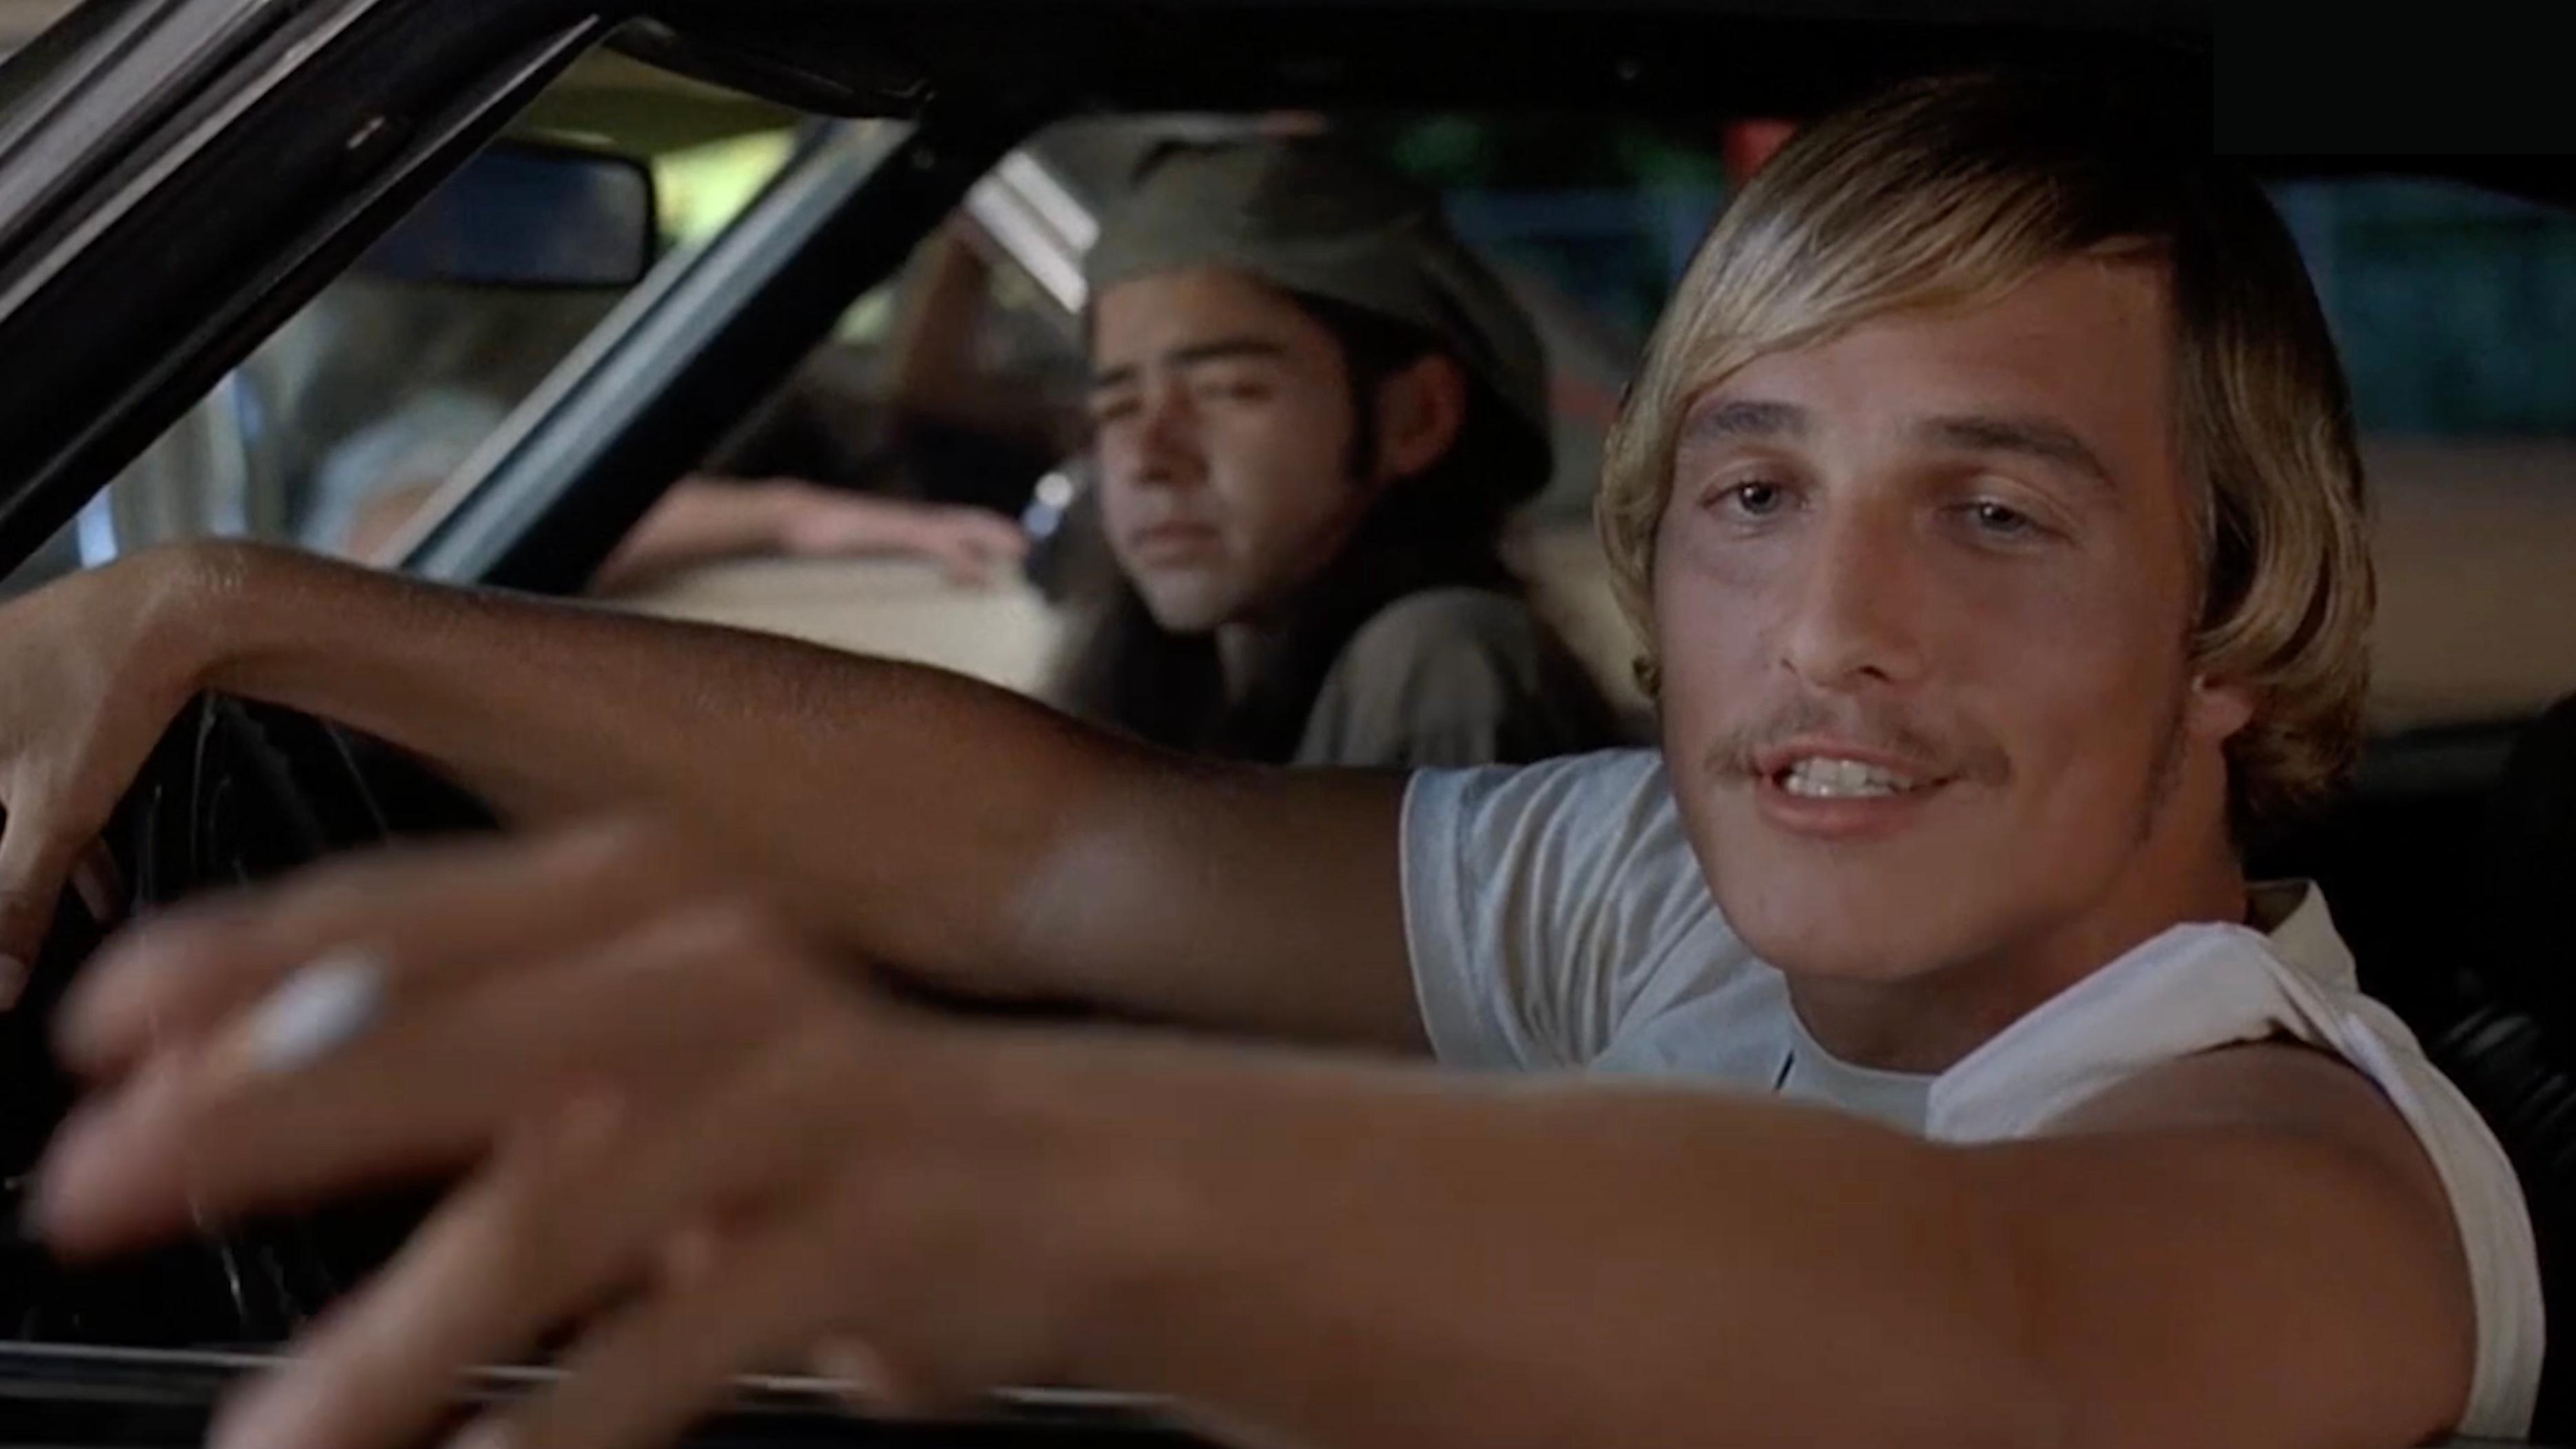 David Wooderson, Dazed and Confused (1993)